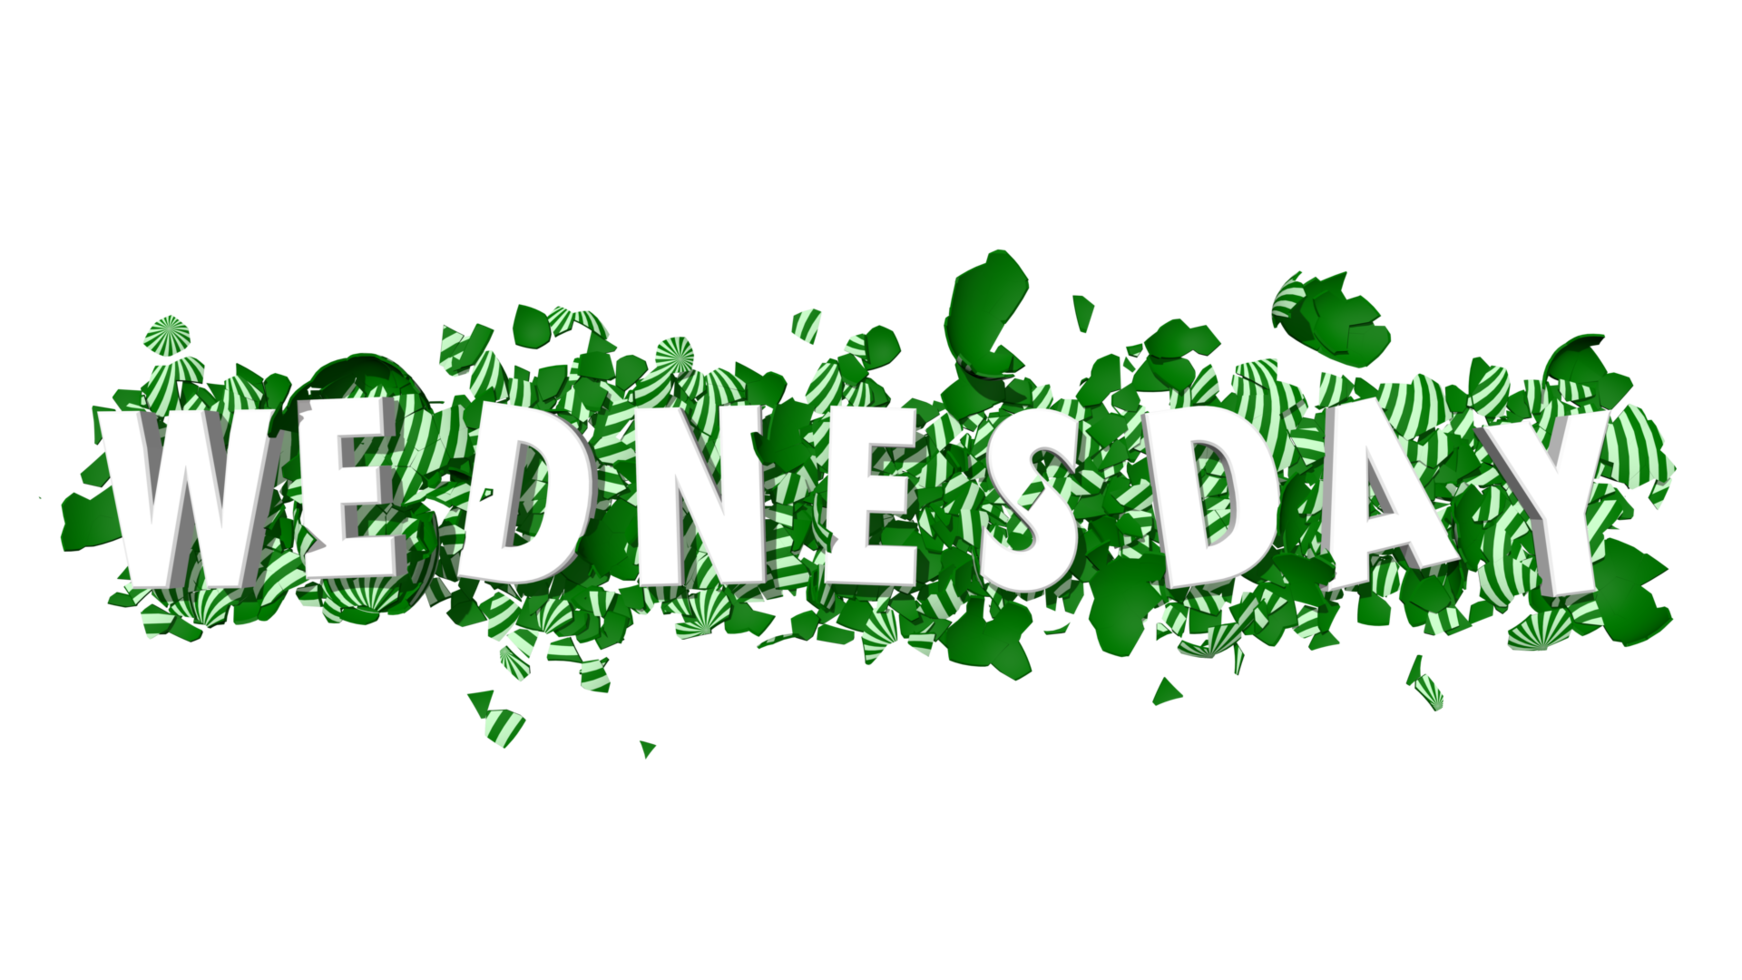 Wednesday Green Color 3D Text Falling on Broken Easter Eggs, 3D Rendering png